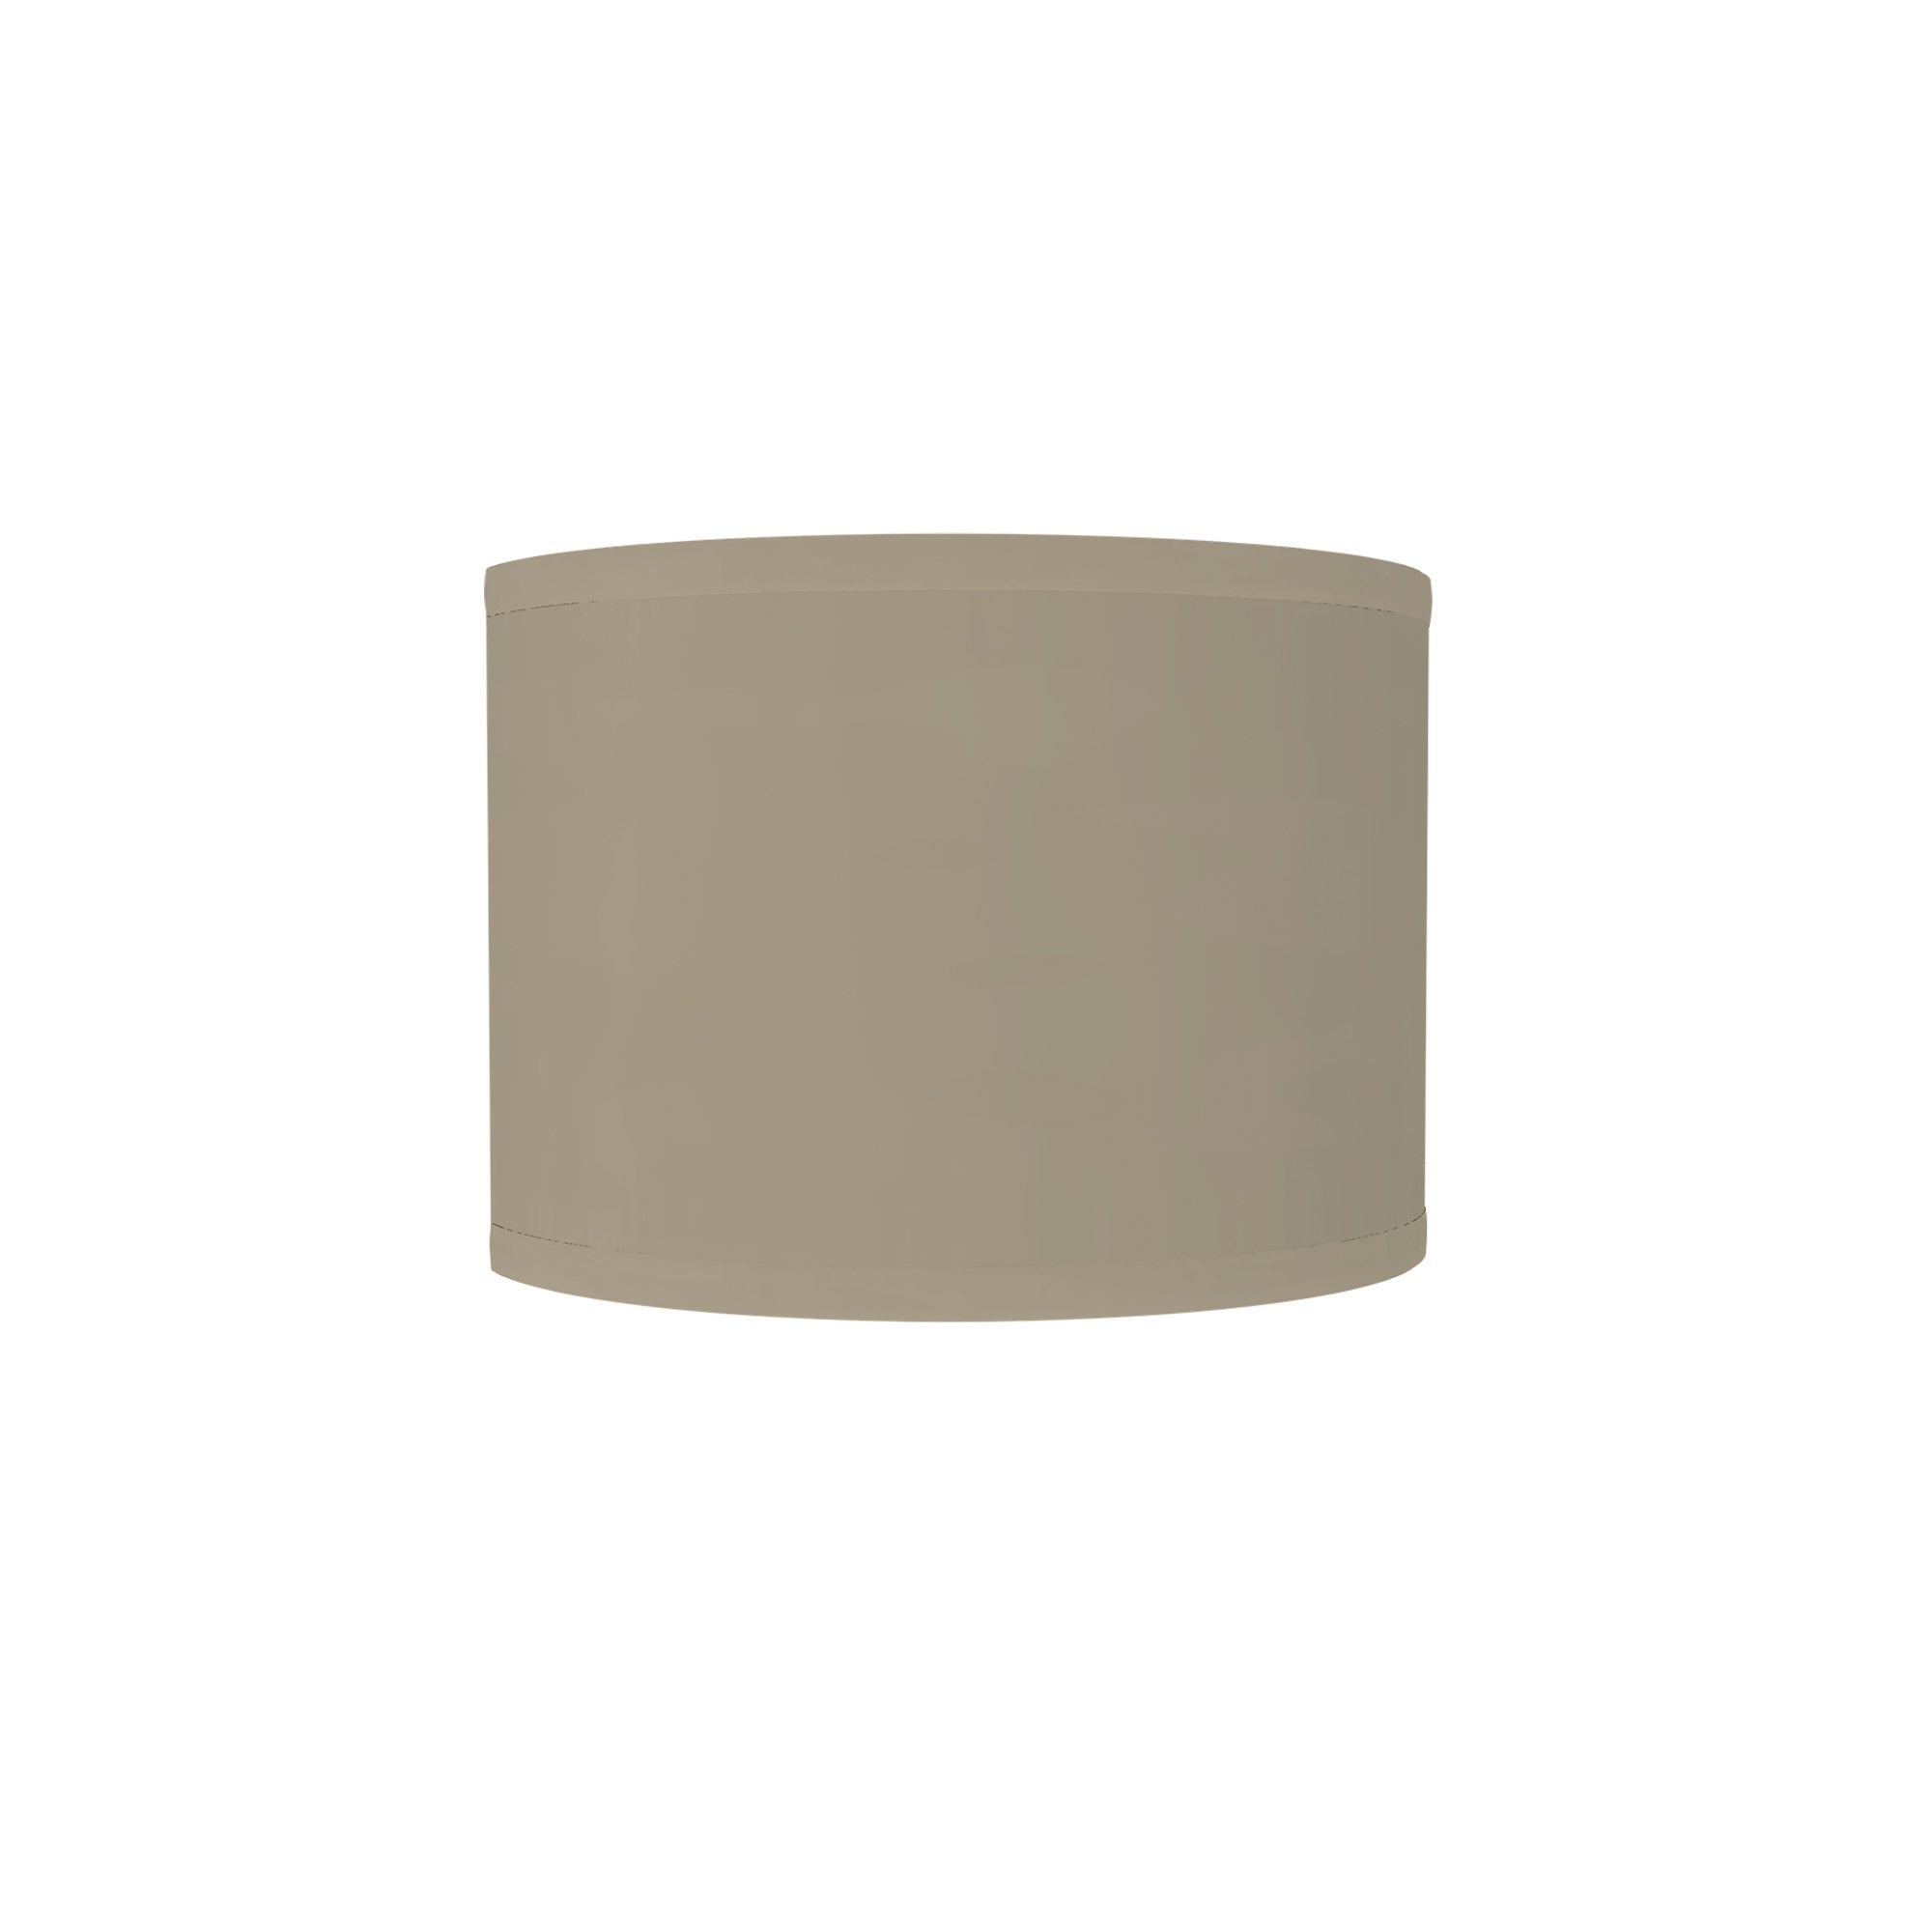 The Bryce Wall Sconce from Seascape Fixtures with a linen shade in tan color.